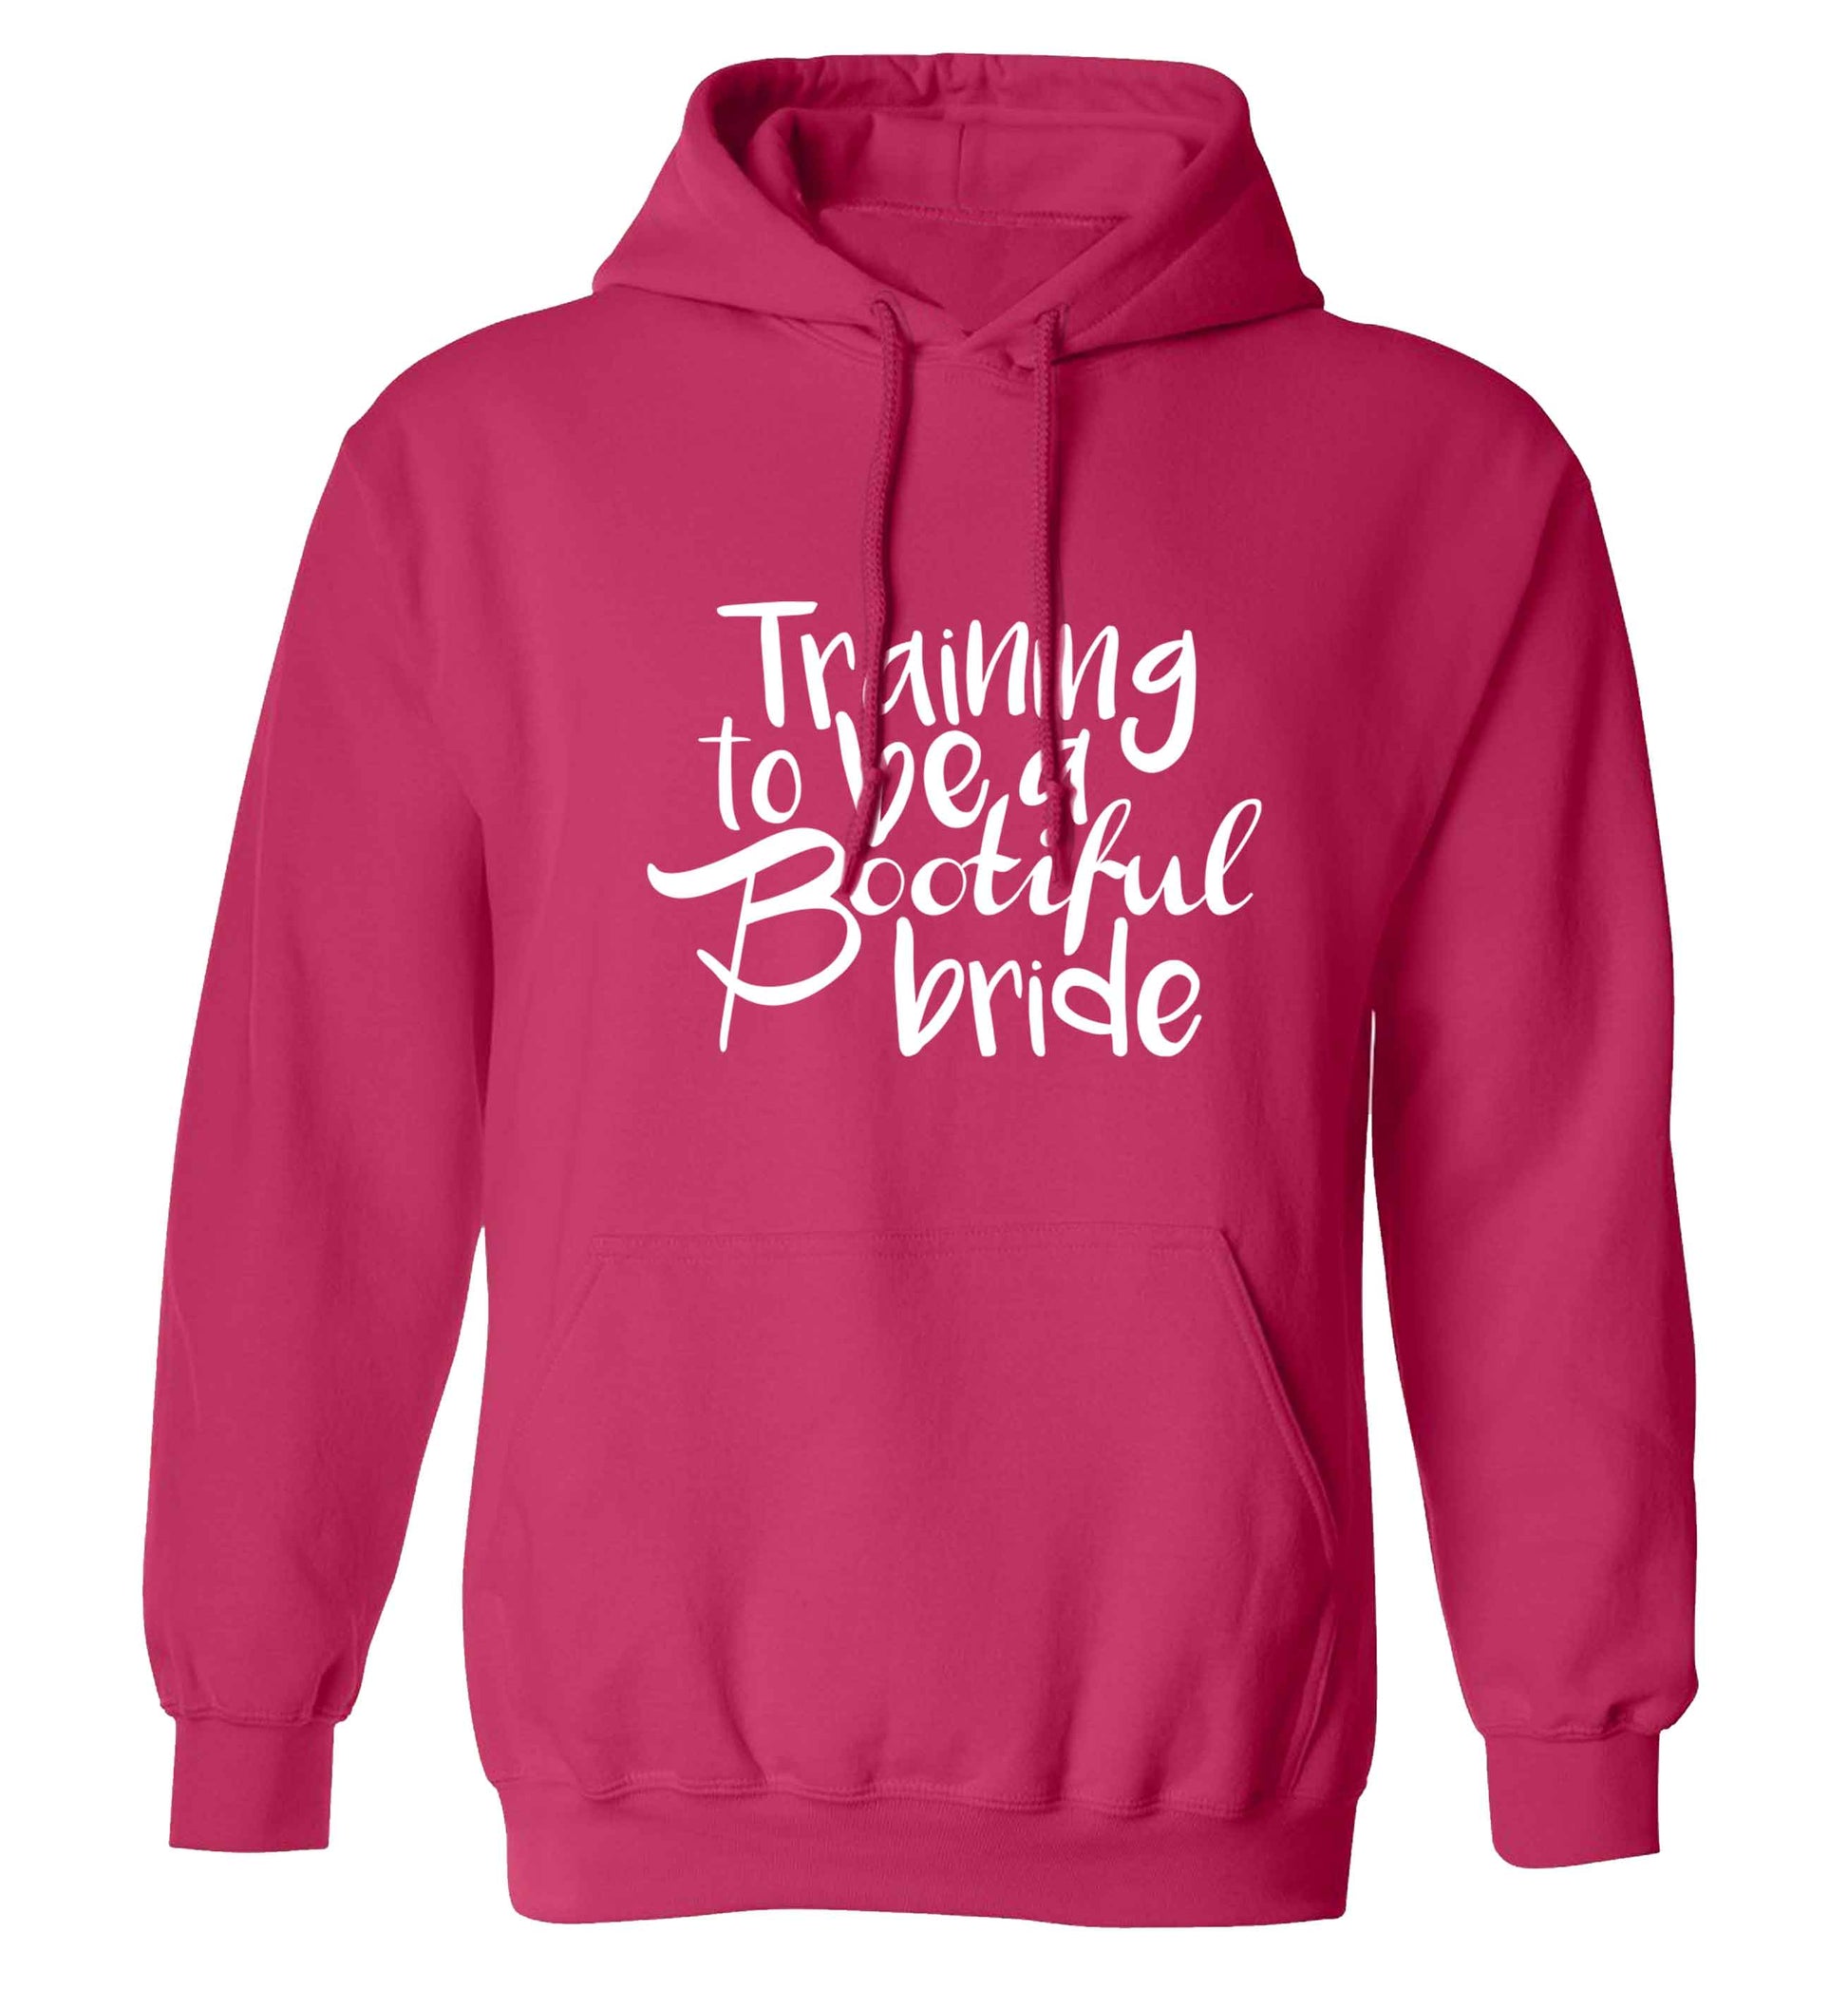 Get motivated and get fit for your big day! Our workout quotes and designs will get you ready to sweat! Perfect for any bride, groom or bridesmaid to be!  adults unisex pink hoodie 2XL